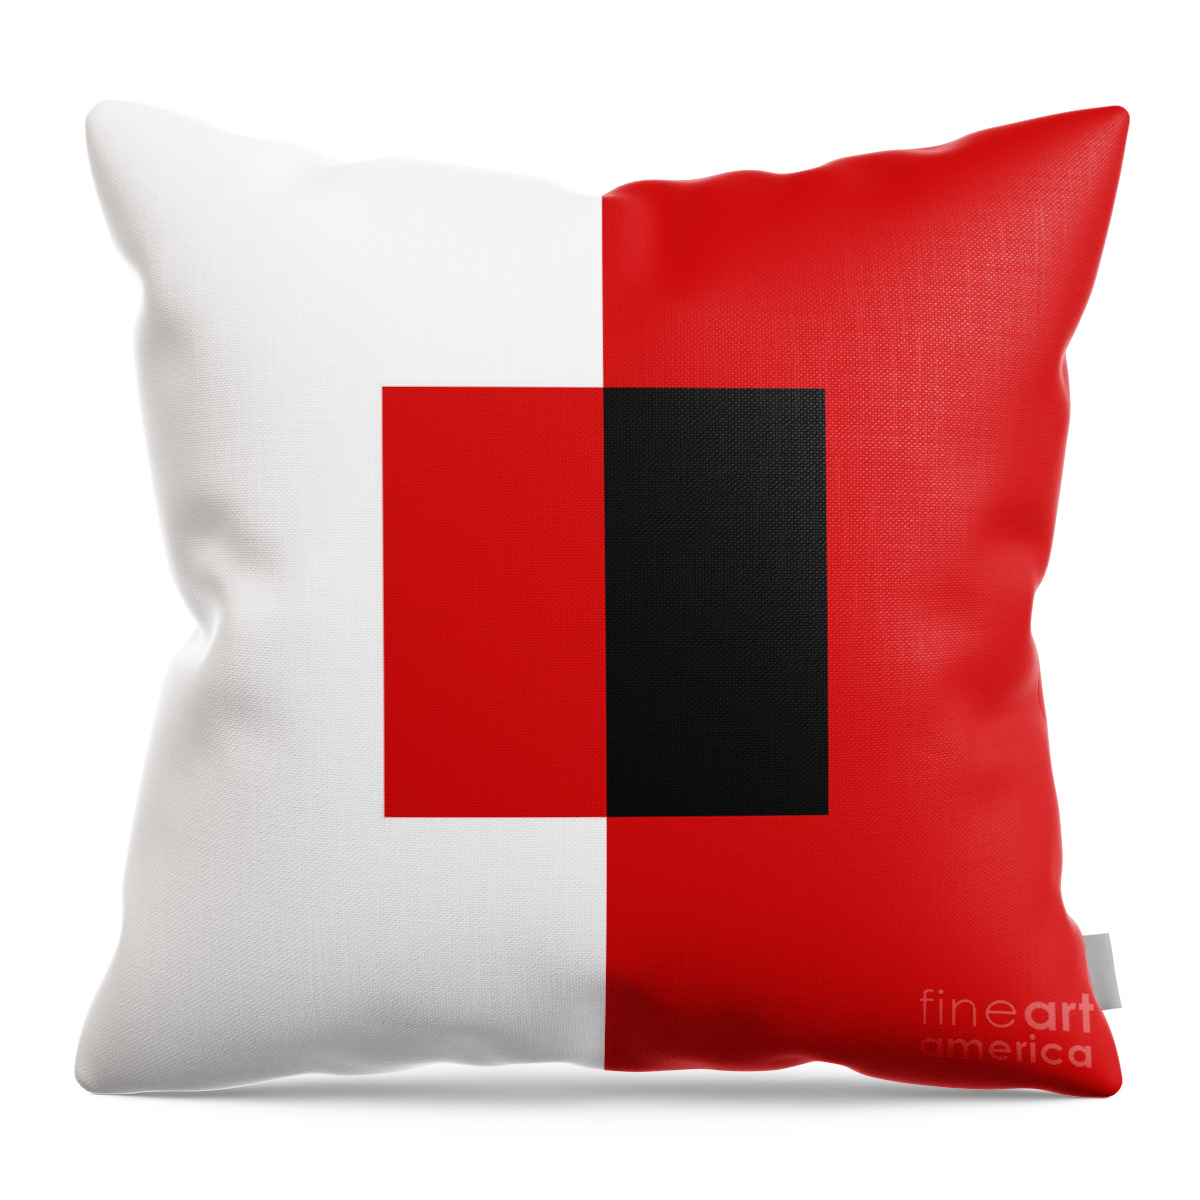 Andee Design Abstract Throw Pillow featuring the digital art Red White And Black 12 Square by Andee Design